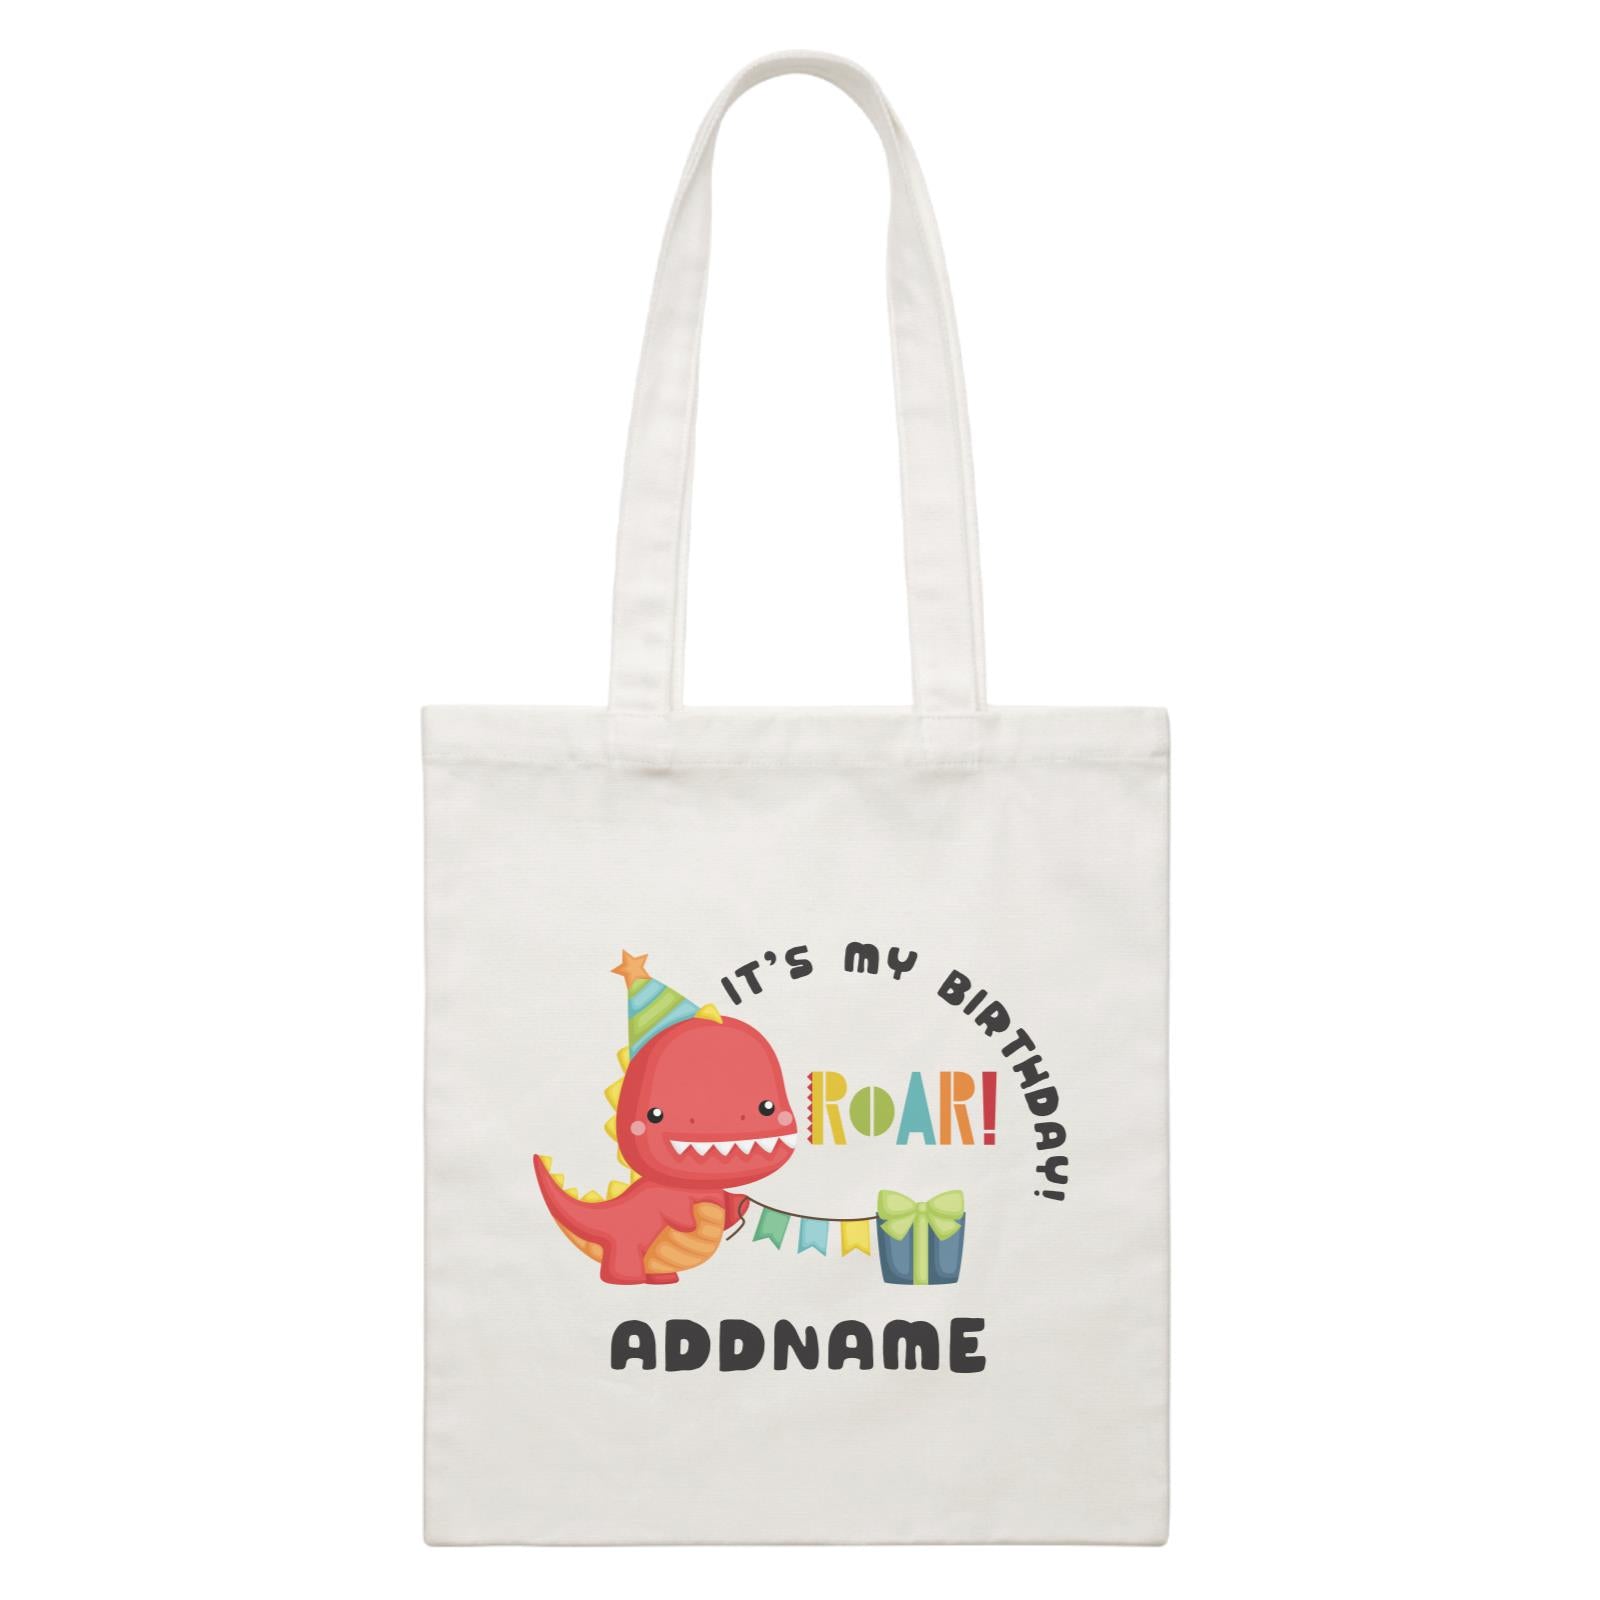 Birthday Dinosaur Happy Red Rex Wearing Party Hat It's My Birthday Addname White Canvas Bag